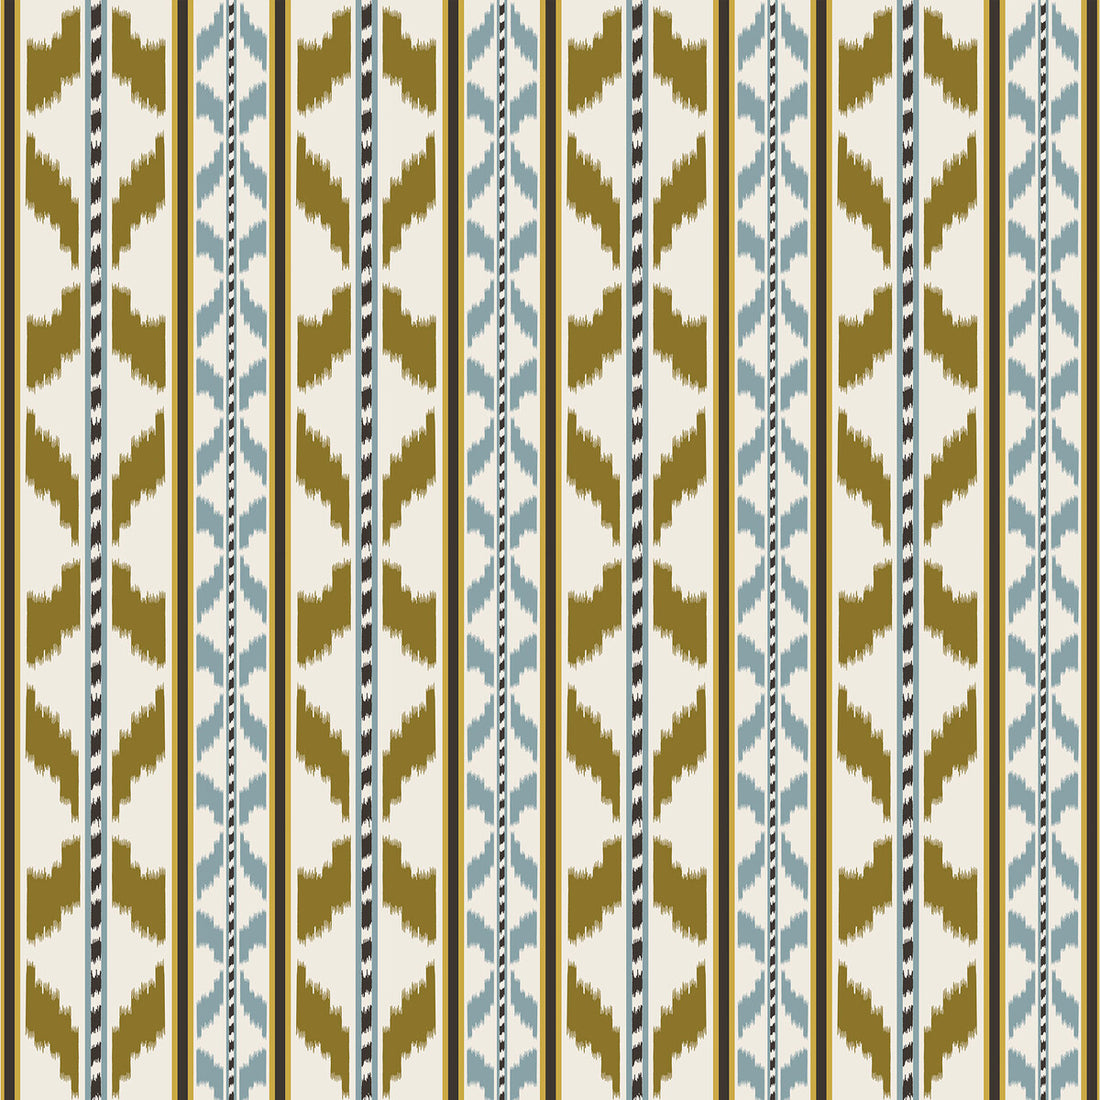 Cala Petita fabric in ocre chocolate color - pattern GDT5680.001.0 - by Gaston y Daniela in the Gaston Maiorica collection